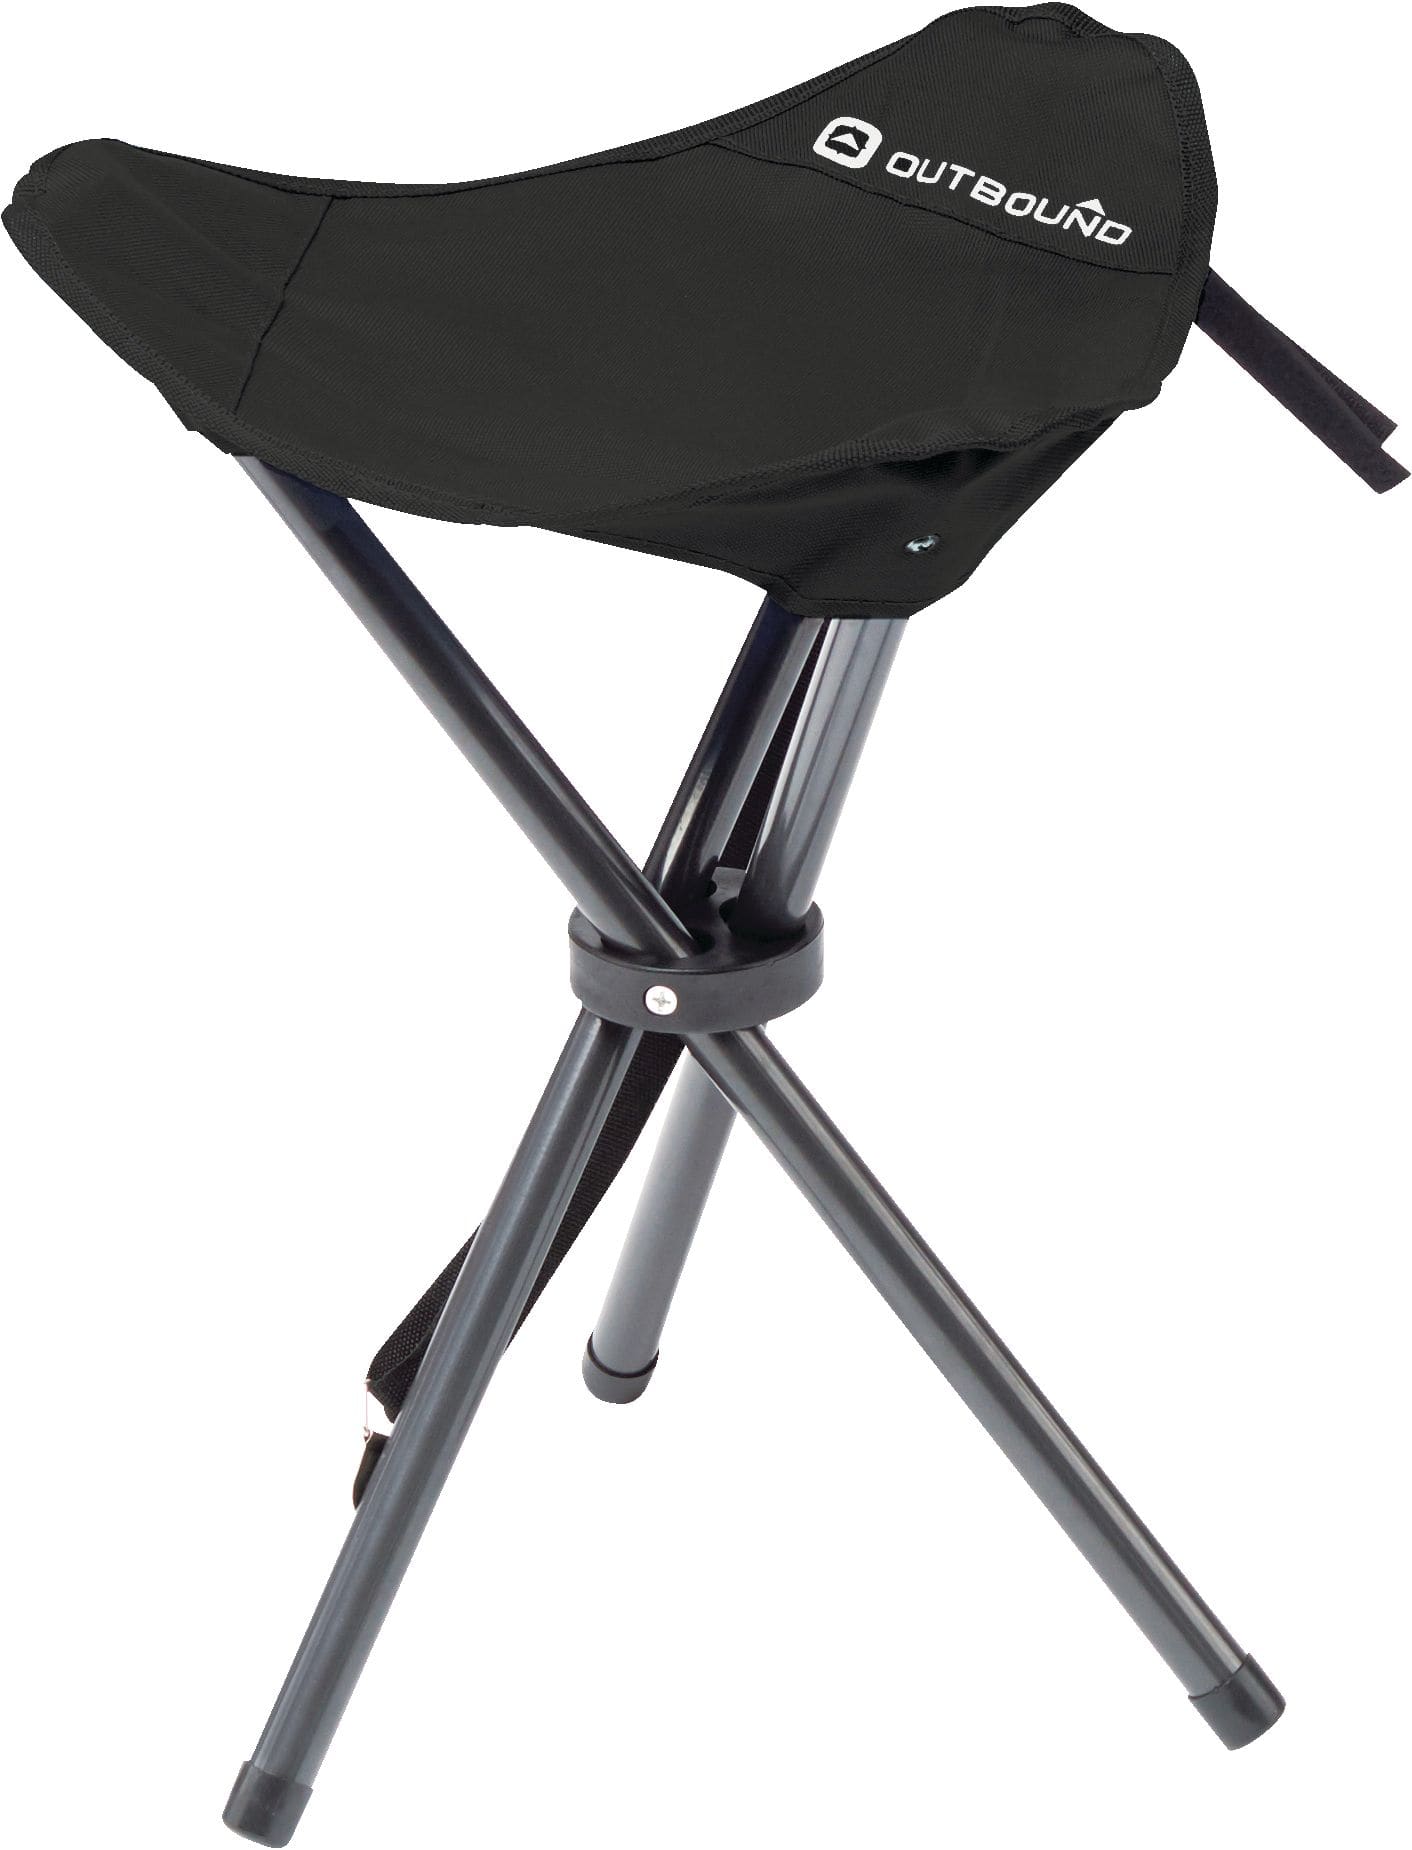 PORTAL Lightweight Backrest Stool Compact Folding Chair Seat with Cooler  Bag and Backpack Straps for Fishing, Camping, Hiking, Supports 225 lbs :  : Sports & Outdoors